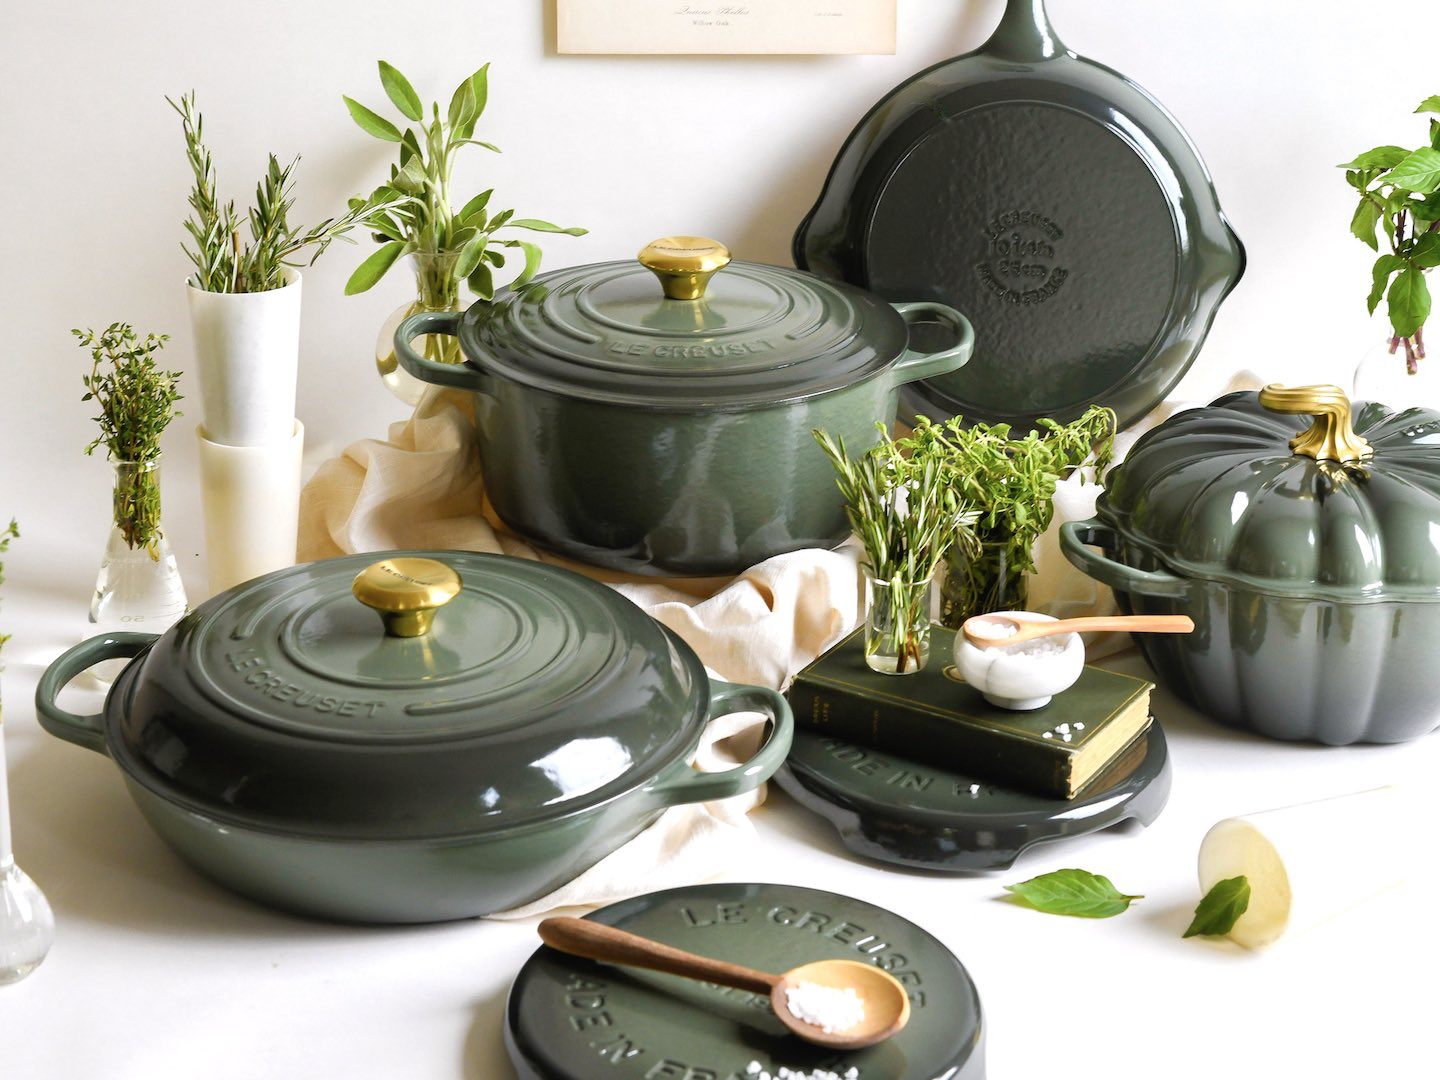 Le Creuset - 9qt Signature Cast Iron Round Dutch Oven - Discounts for  Veterans, VA employees and their families!